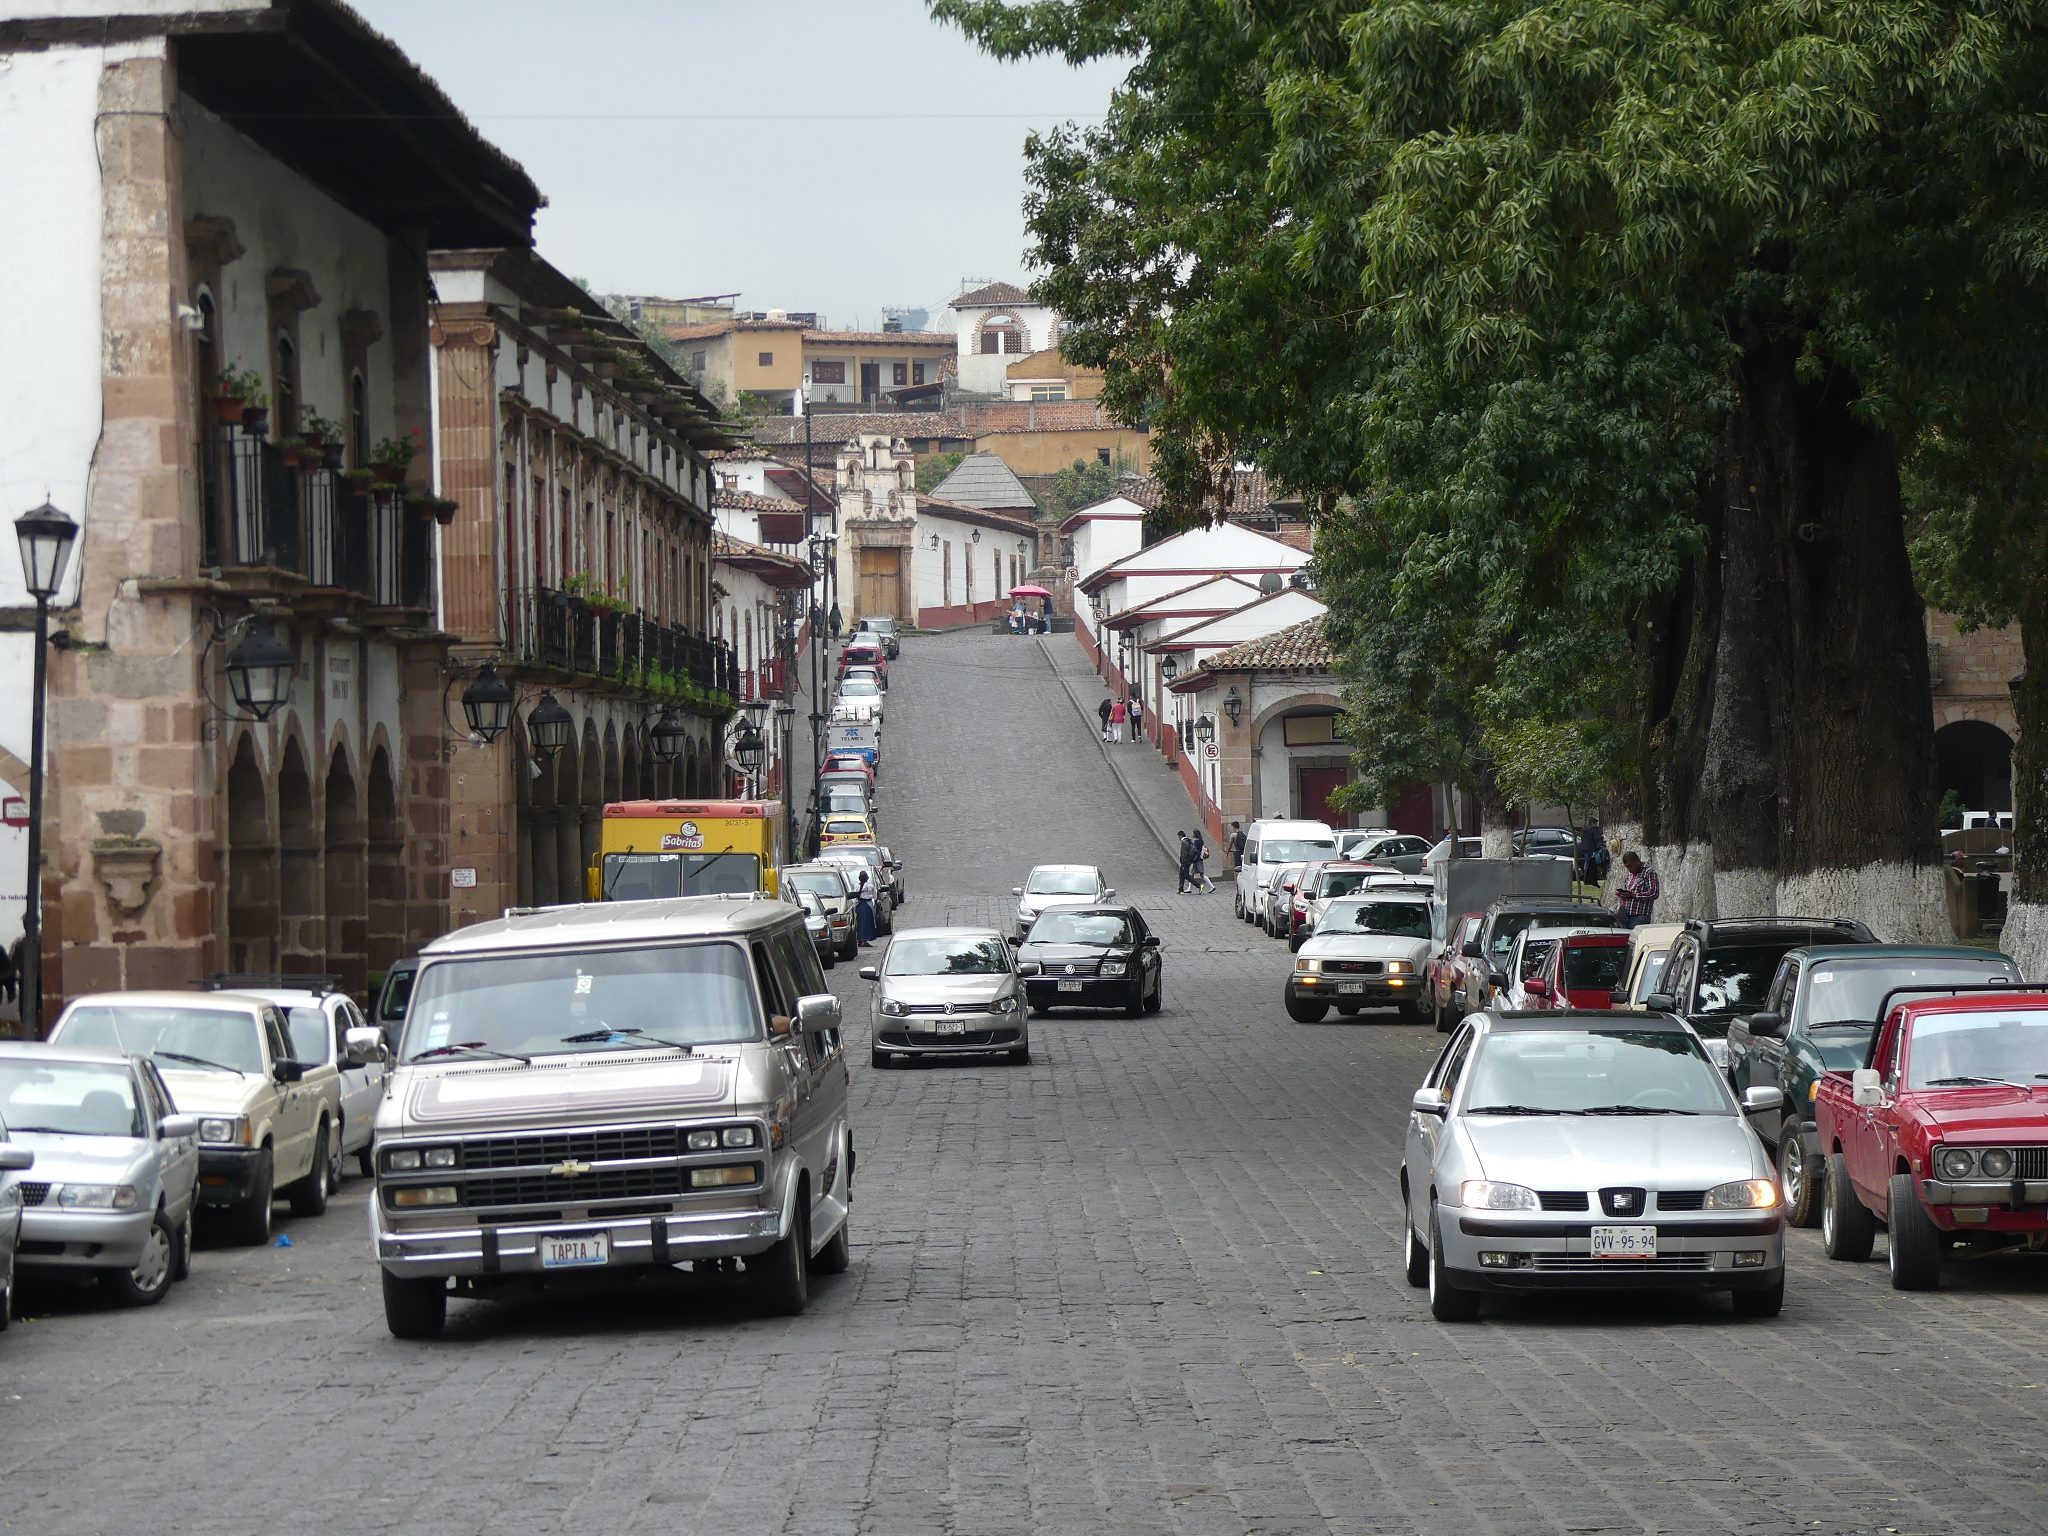 Patzcuaro town scenes, cobbled stone streets, well preserved